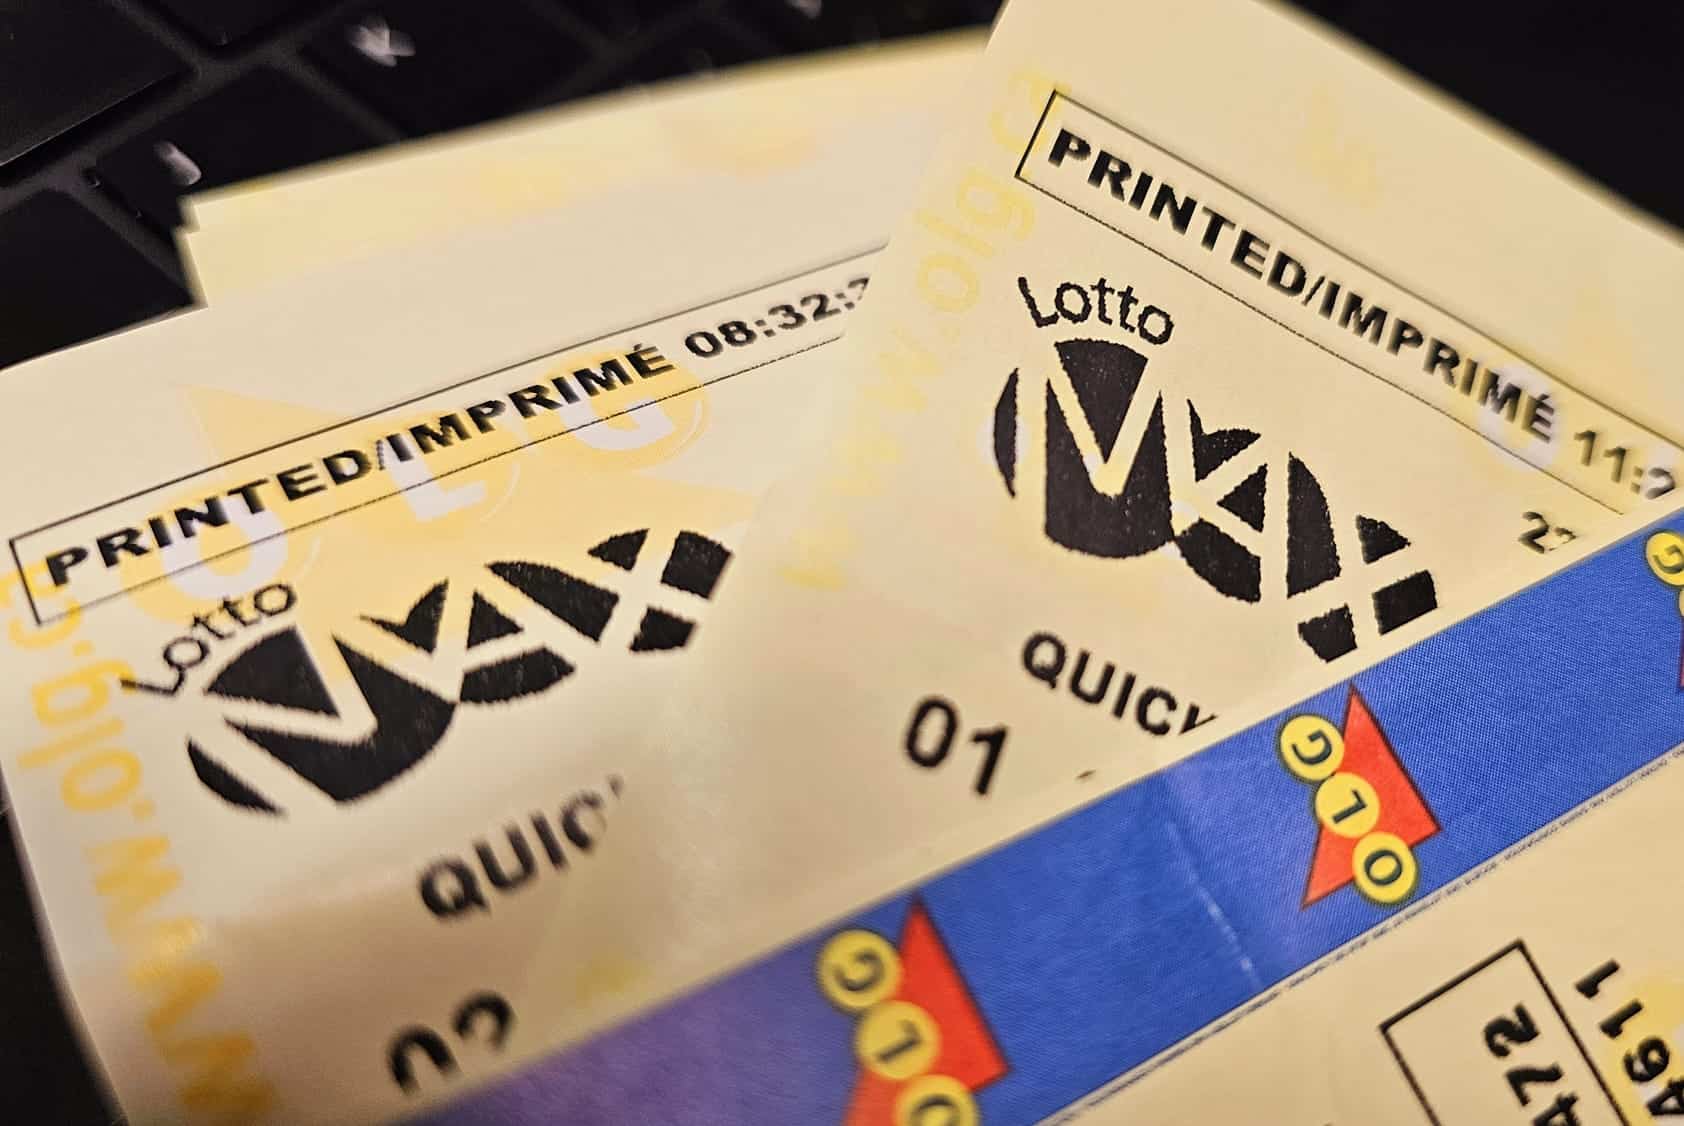 There was one $70 million lottery ticket was sold in Canada